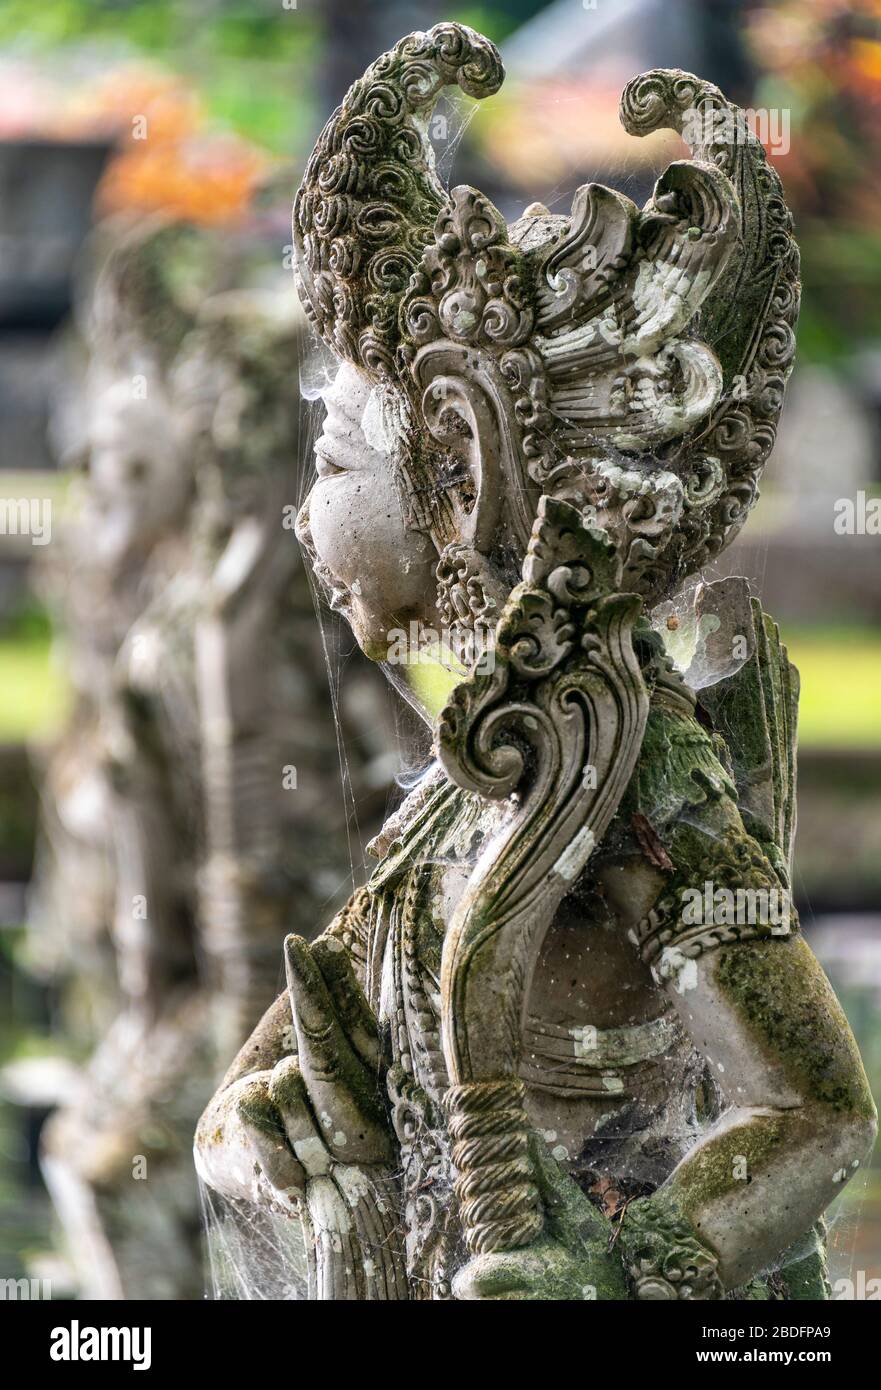 Vertical view of a beautiful statue in the water palace gardens in Bali, Indonesia. Stock Photo